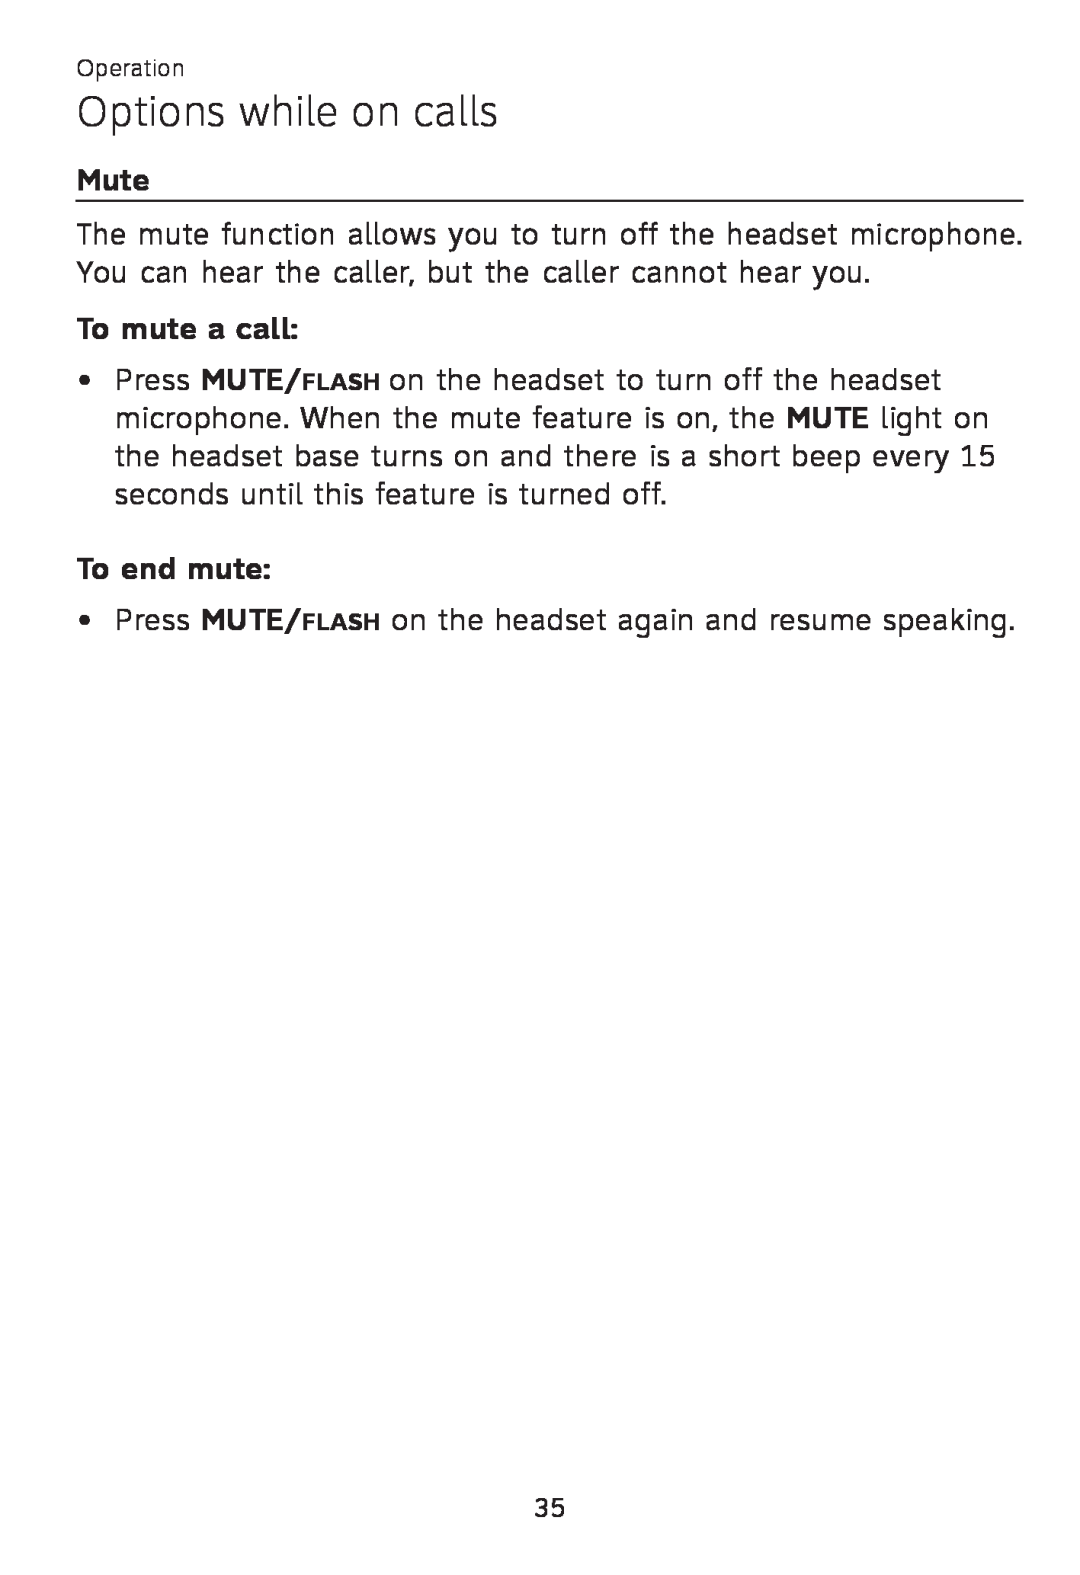 AT&T TL 7610 user manual Mute, To mute a call, To end mute, Options while on calls 